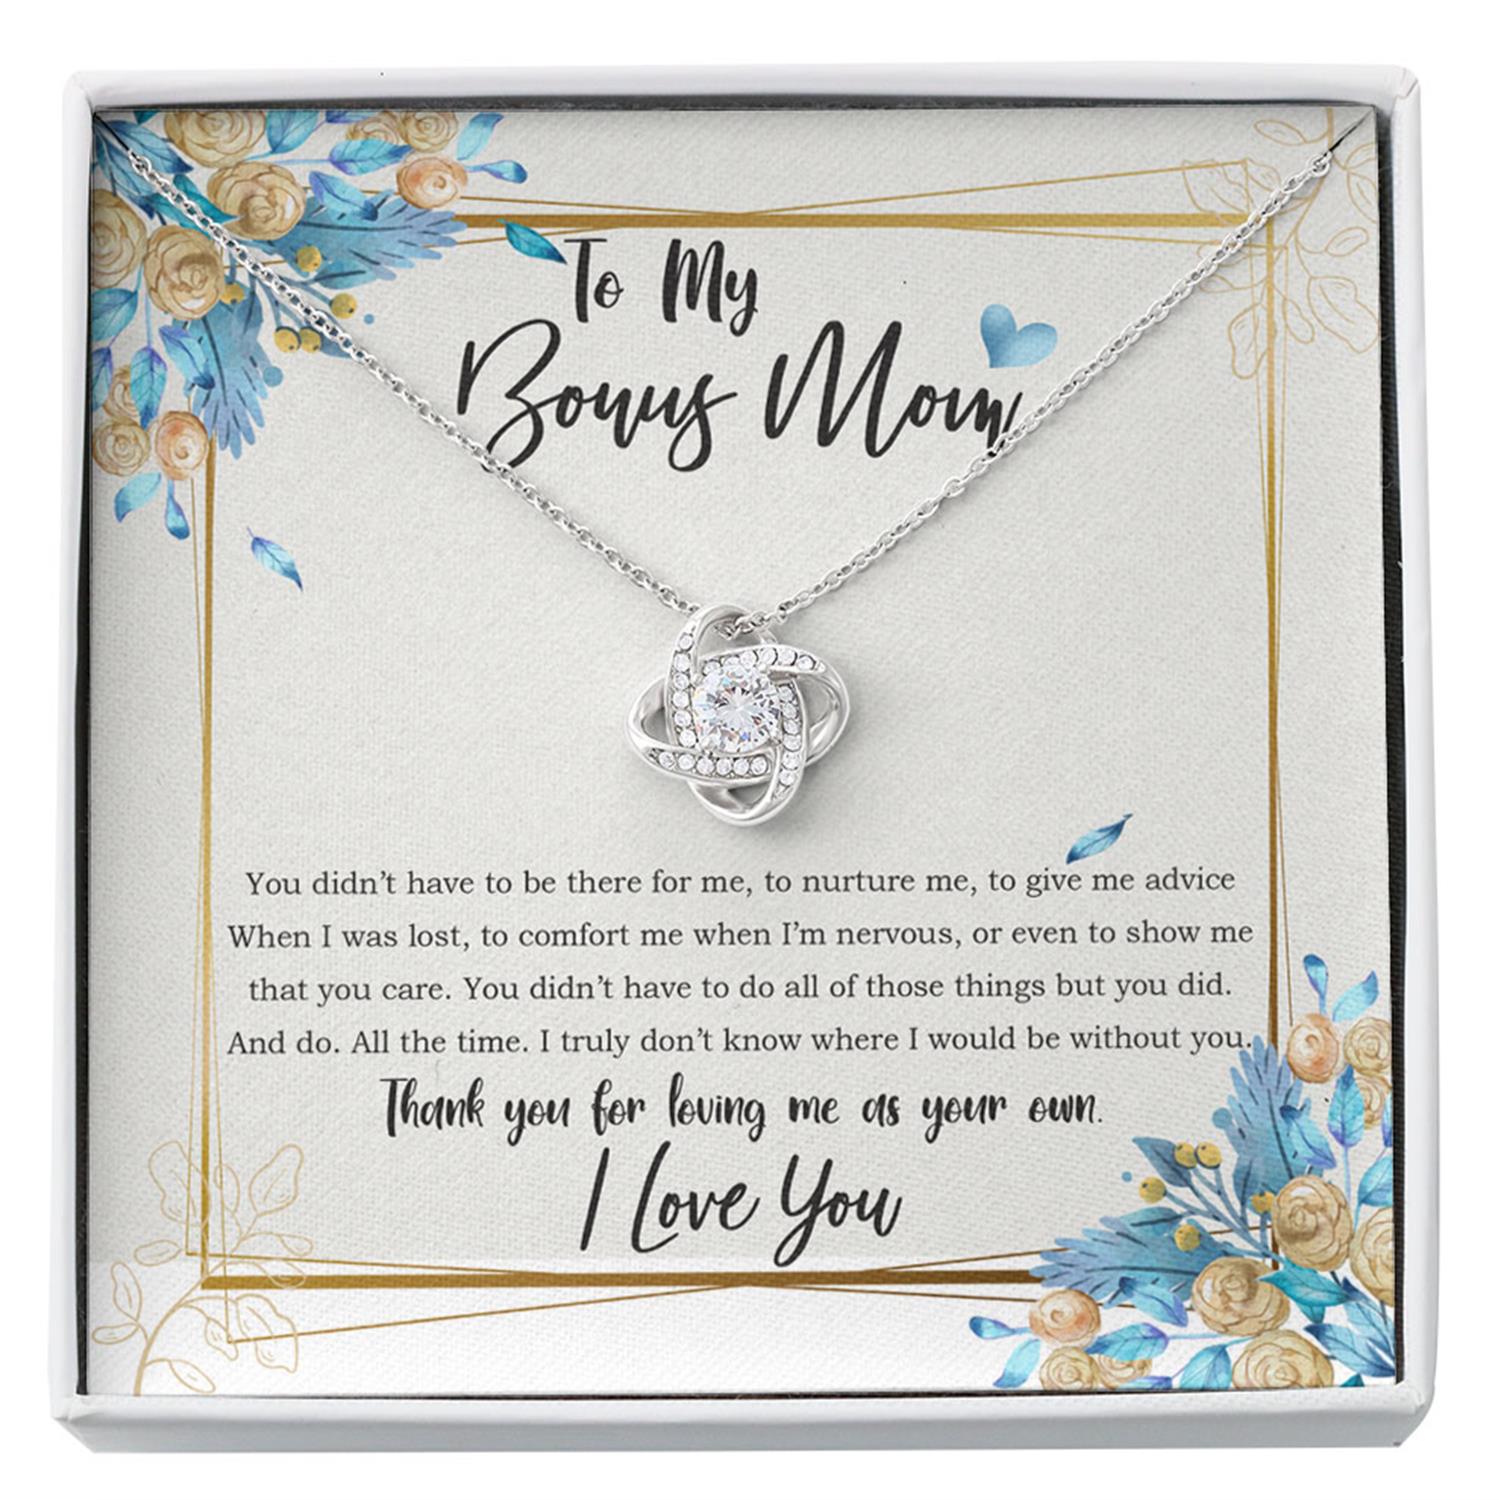 Stepmom Necklace, Bonus Mom Necklace Gift, Stepmom Mother In Law Wedding Gift From Bride Custom Necklace